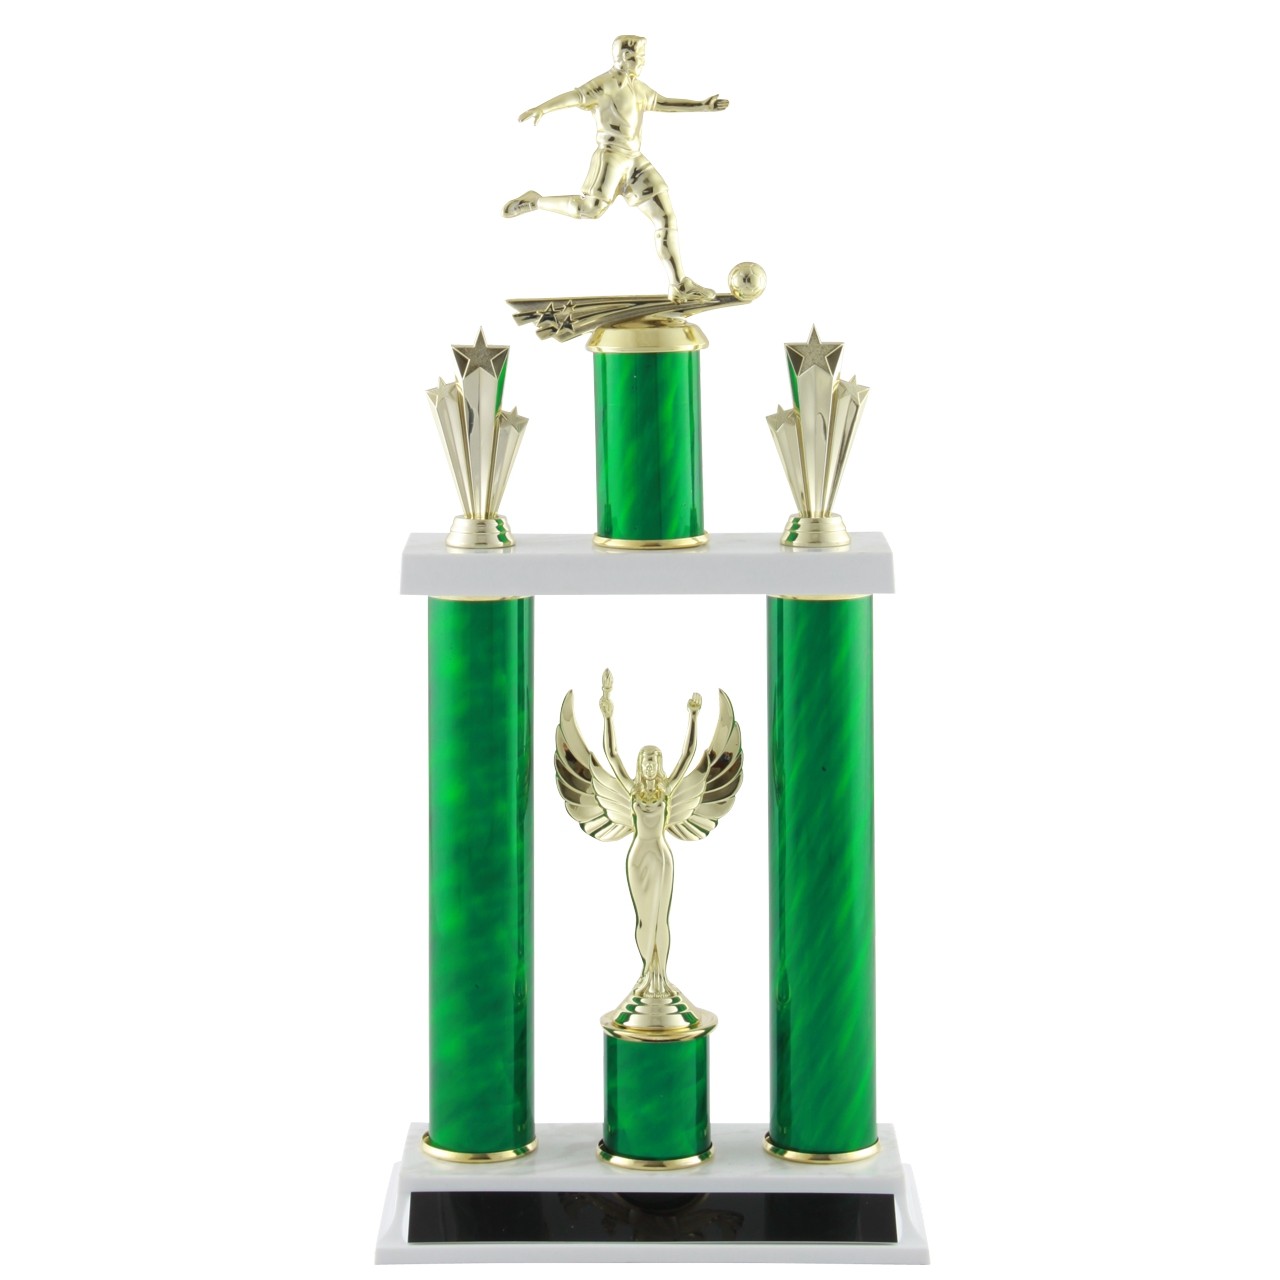 4.5" tall Gold Male Soccer trophy topper 